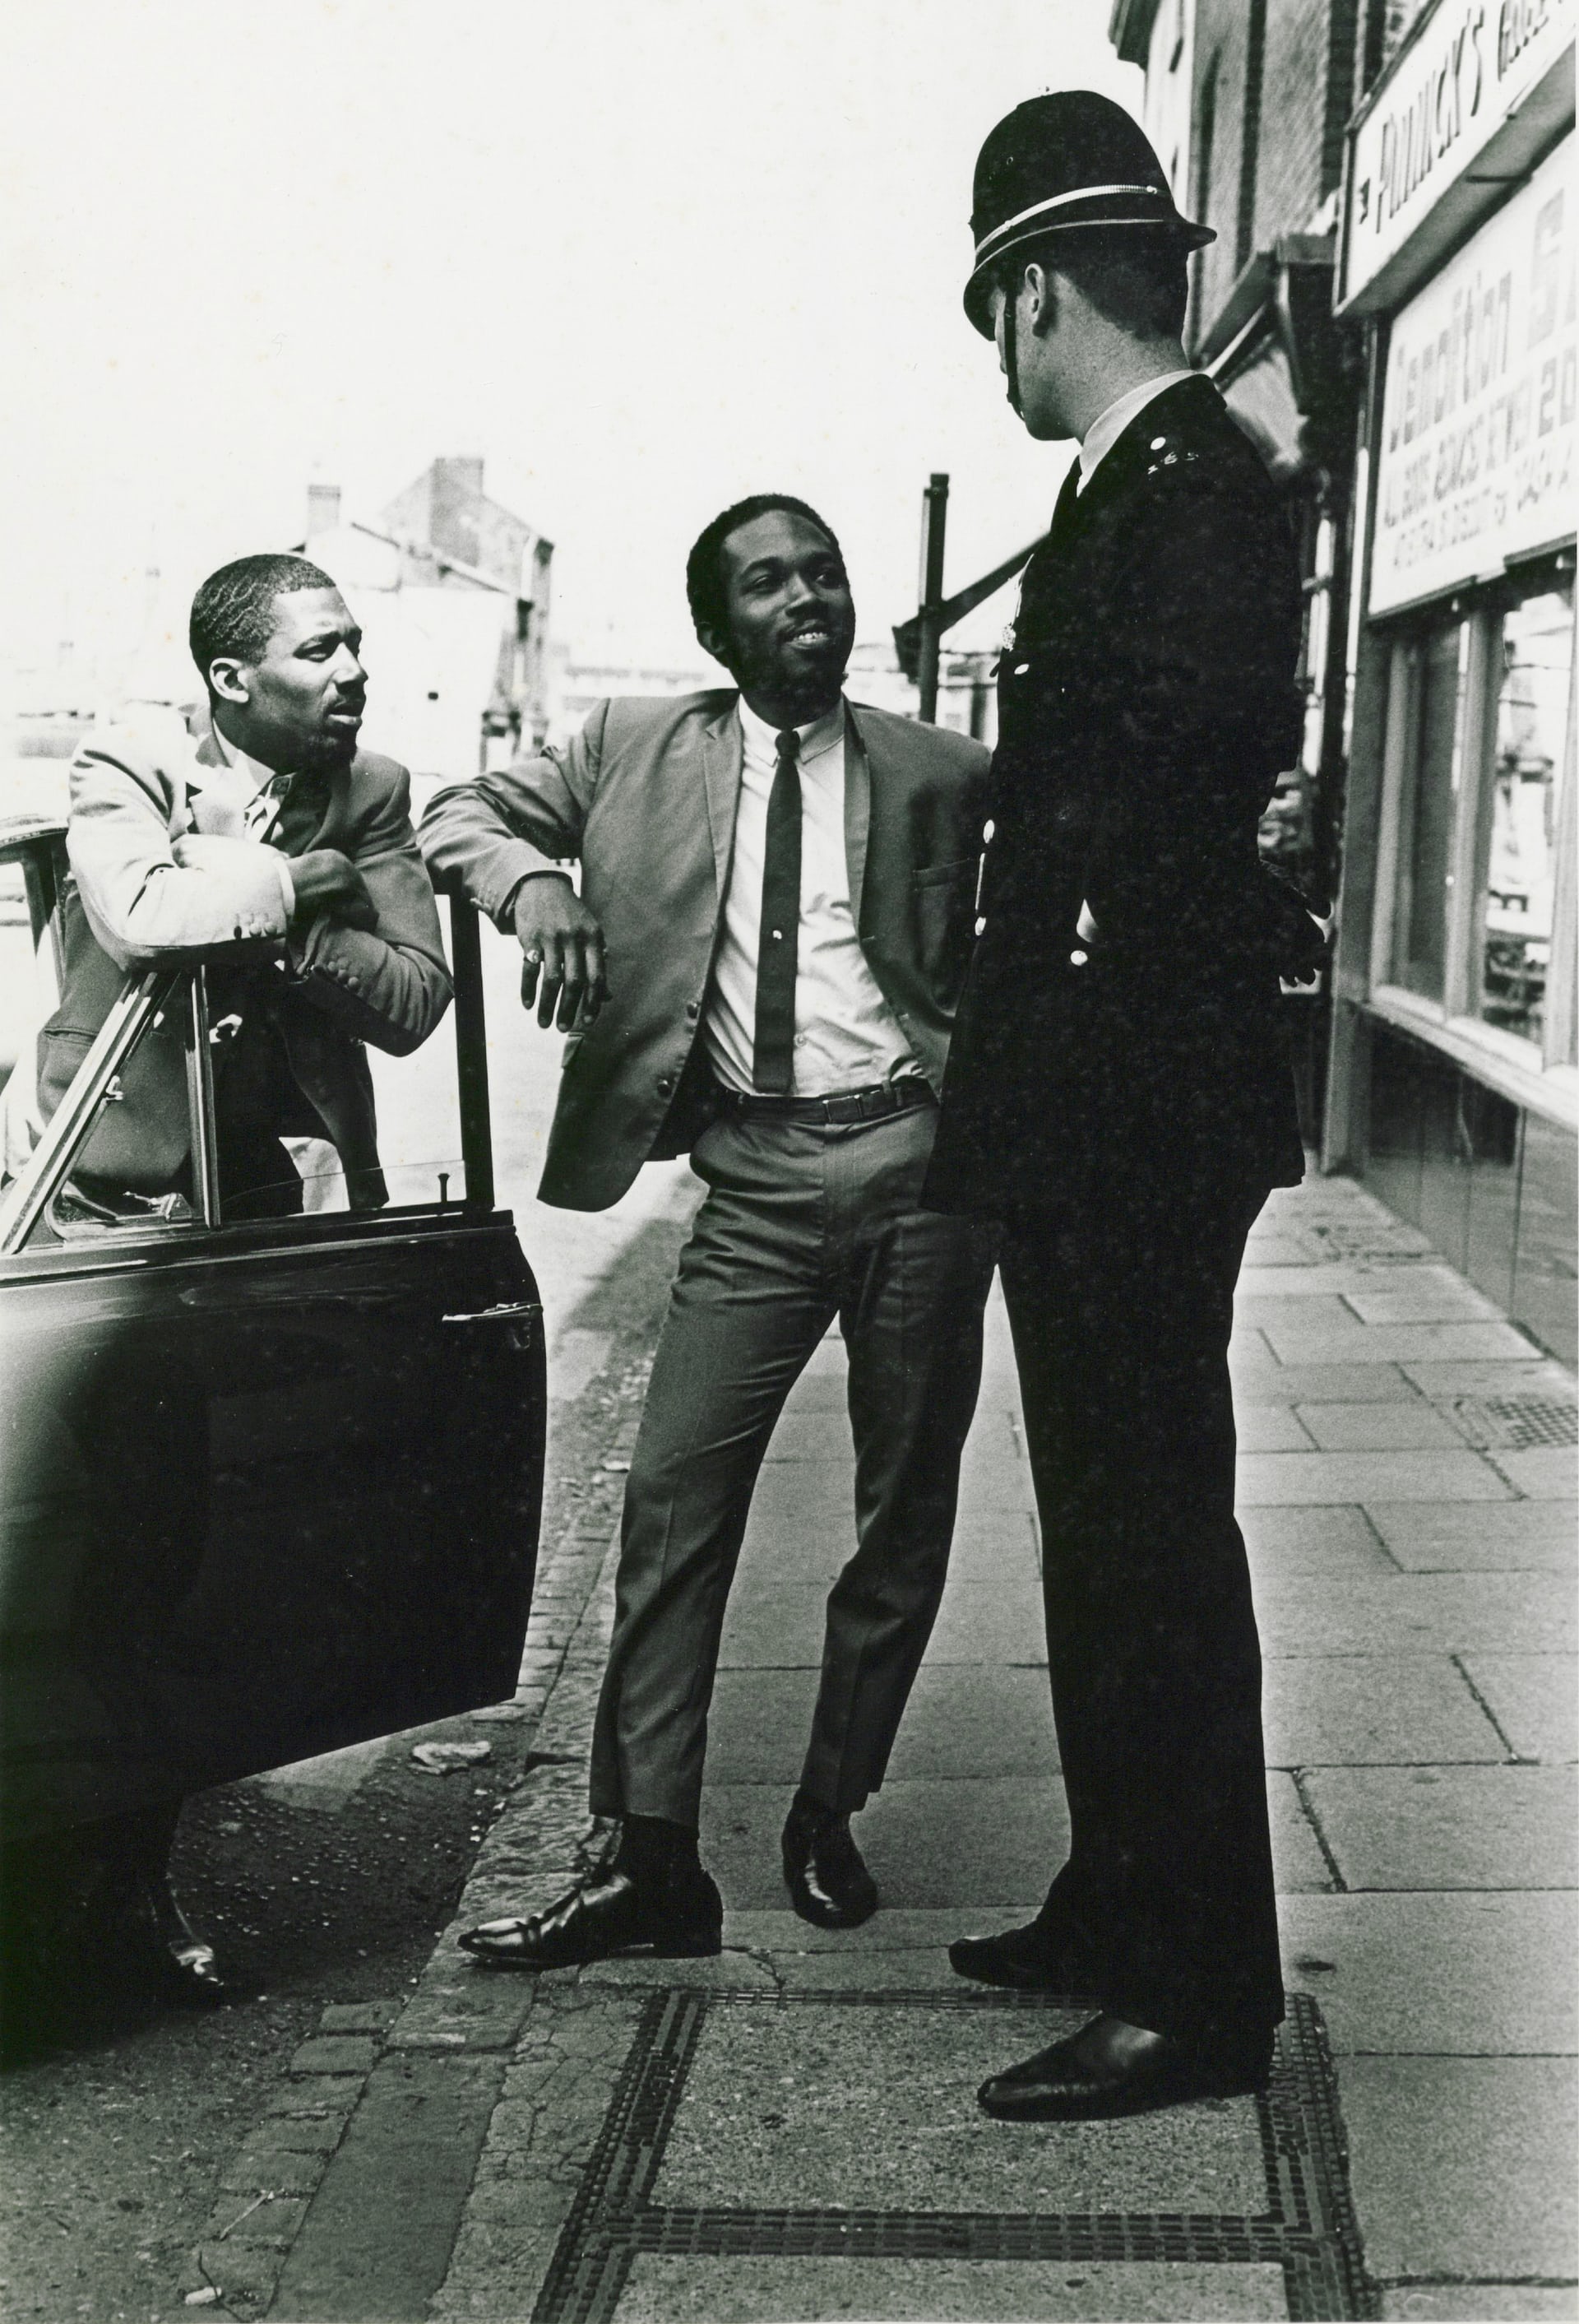 Pimps and a cop on the street (c.1968), by Janet Mendelsohn